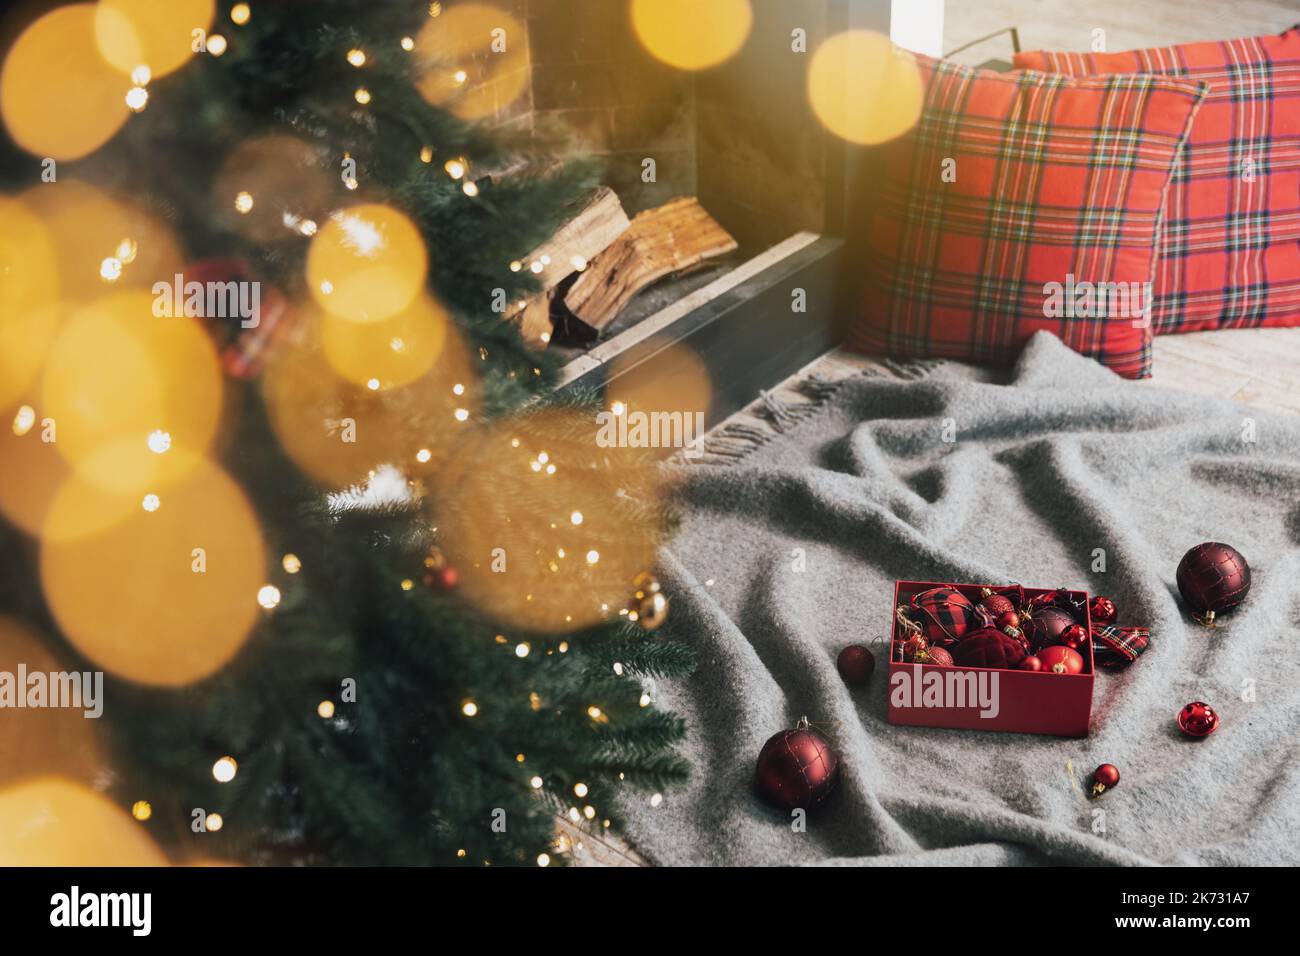 Box of Christmas balls laying on gray carpet or plaid ready for use for decorating and hanging on green Christmas fir tree with lights, garland in the living room near fireplace with wood inside Stock Photo